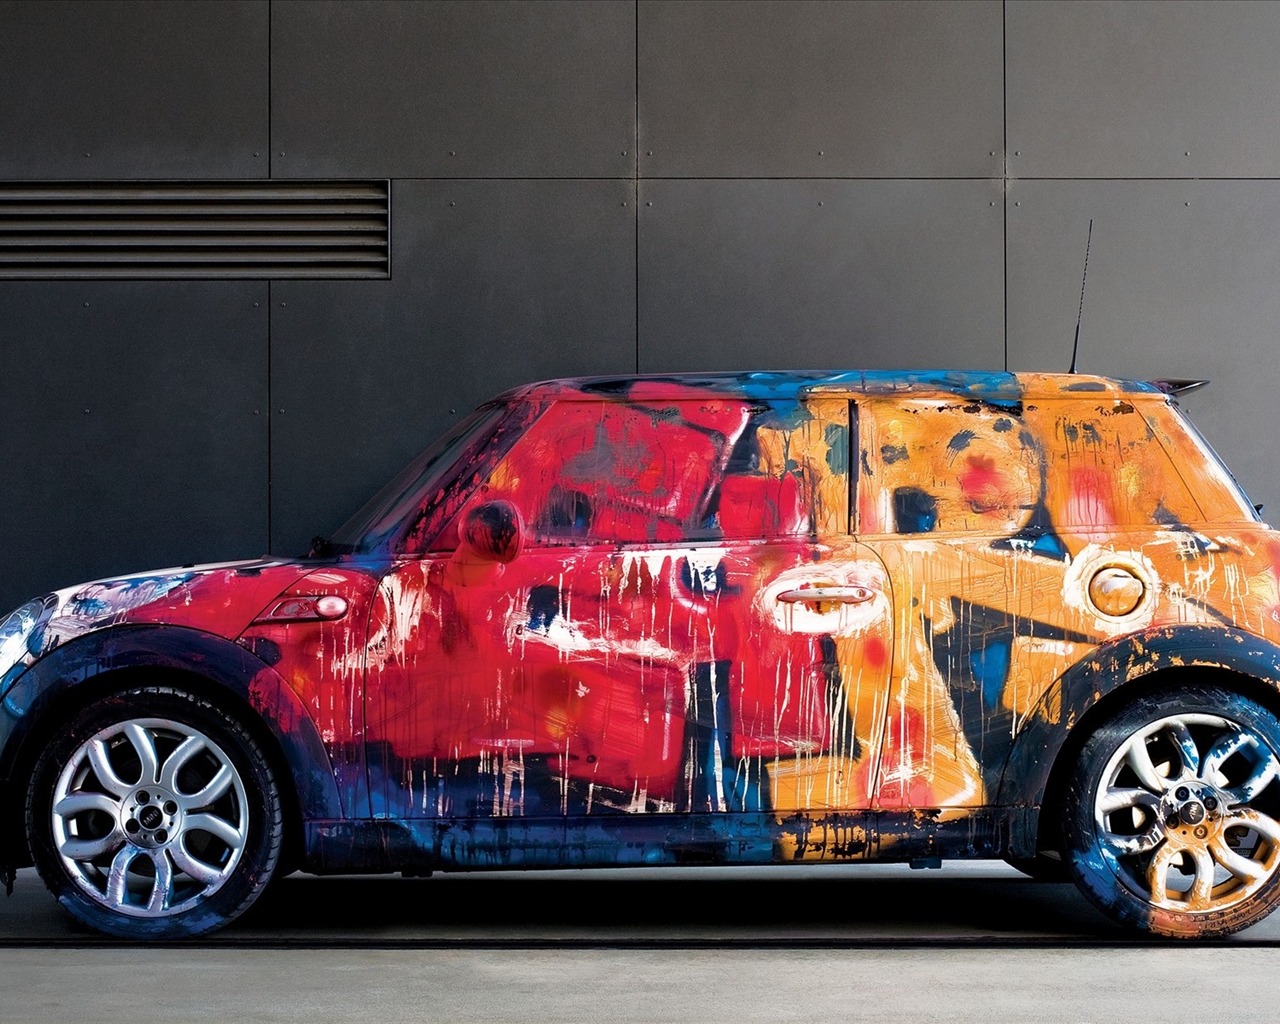 Personalized painted car wallpaper #1 - 1280x1024